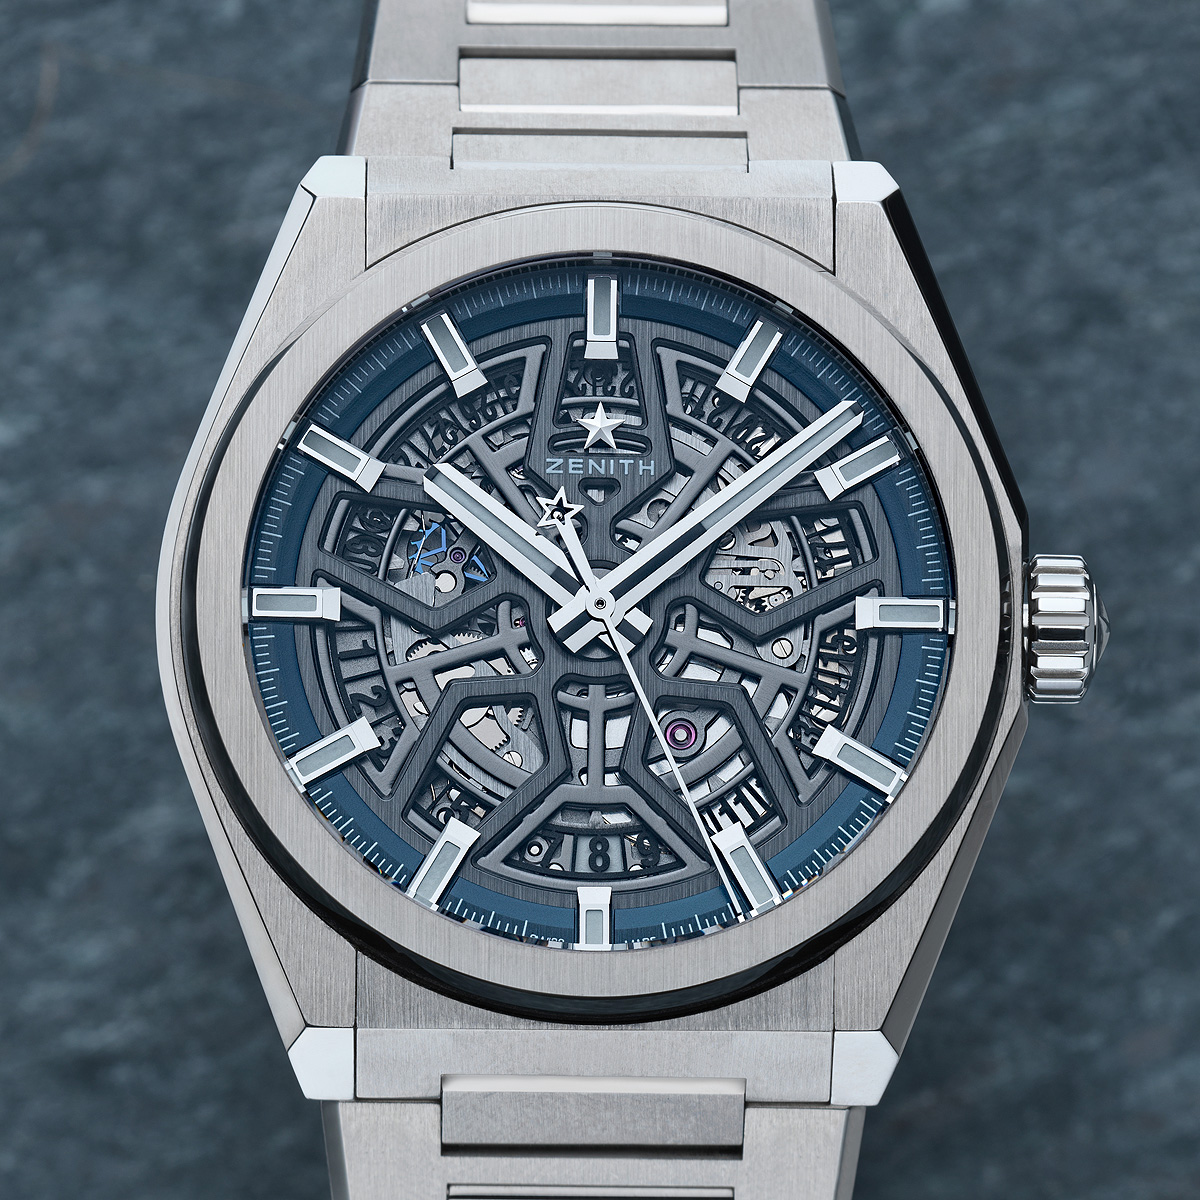 Showing at WatchTime New York 2018: Zenith Defy Classic Collection